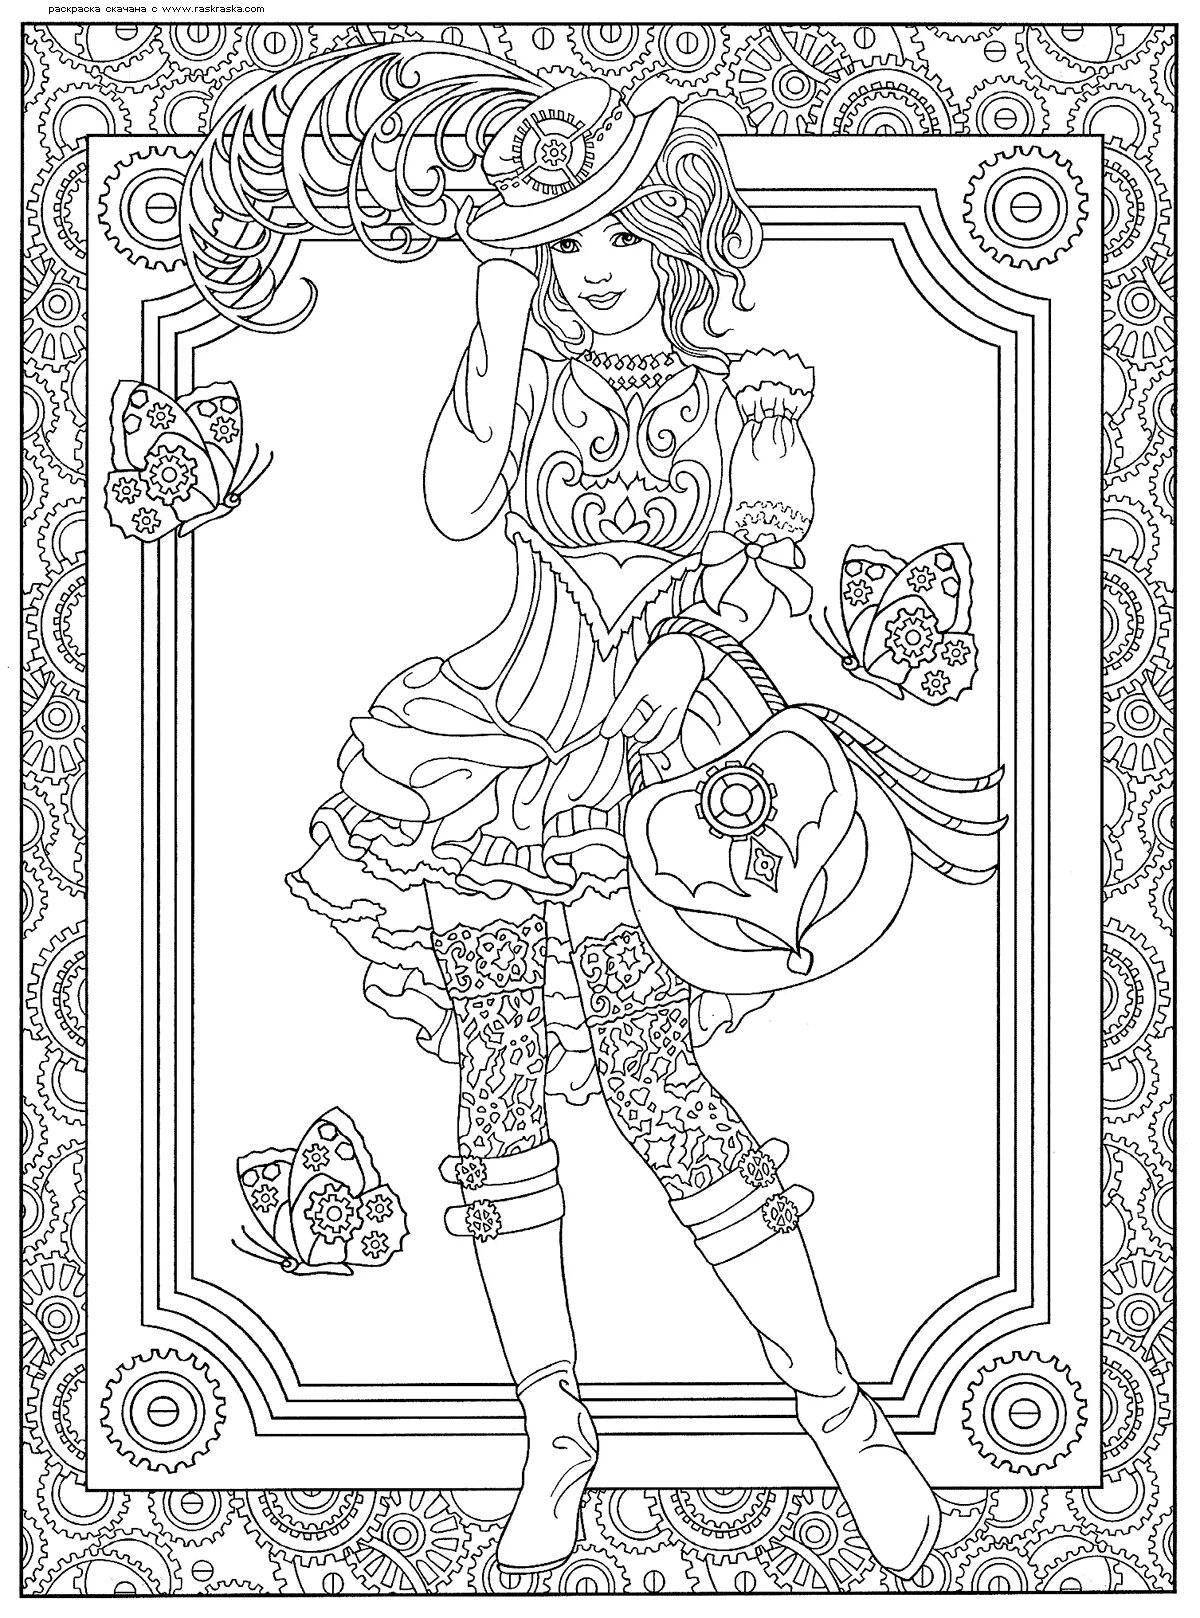 Fascinating steampunk coloring book